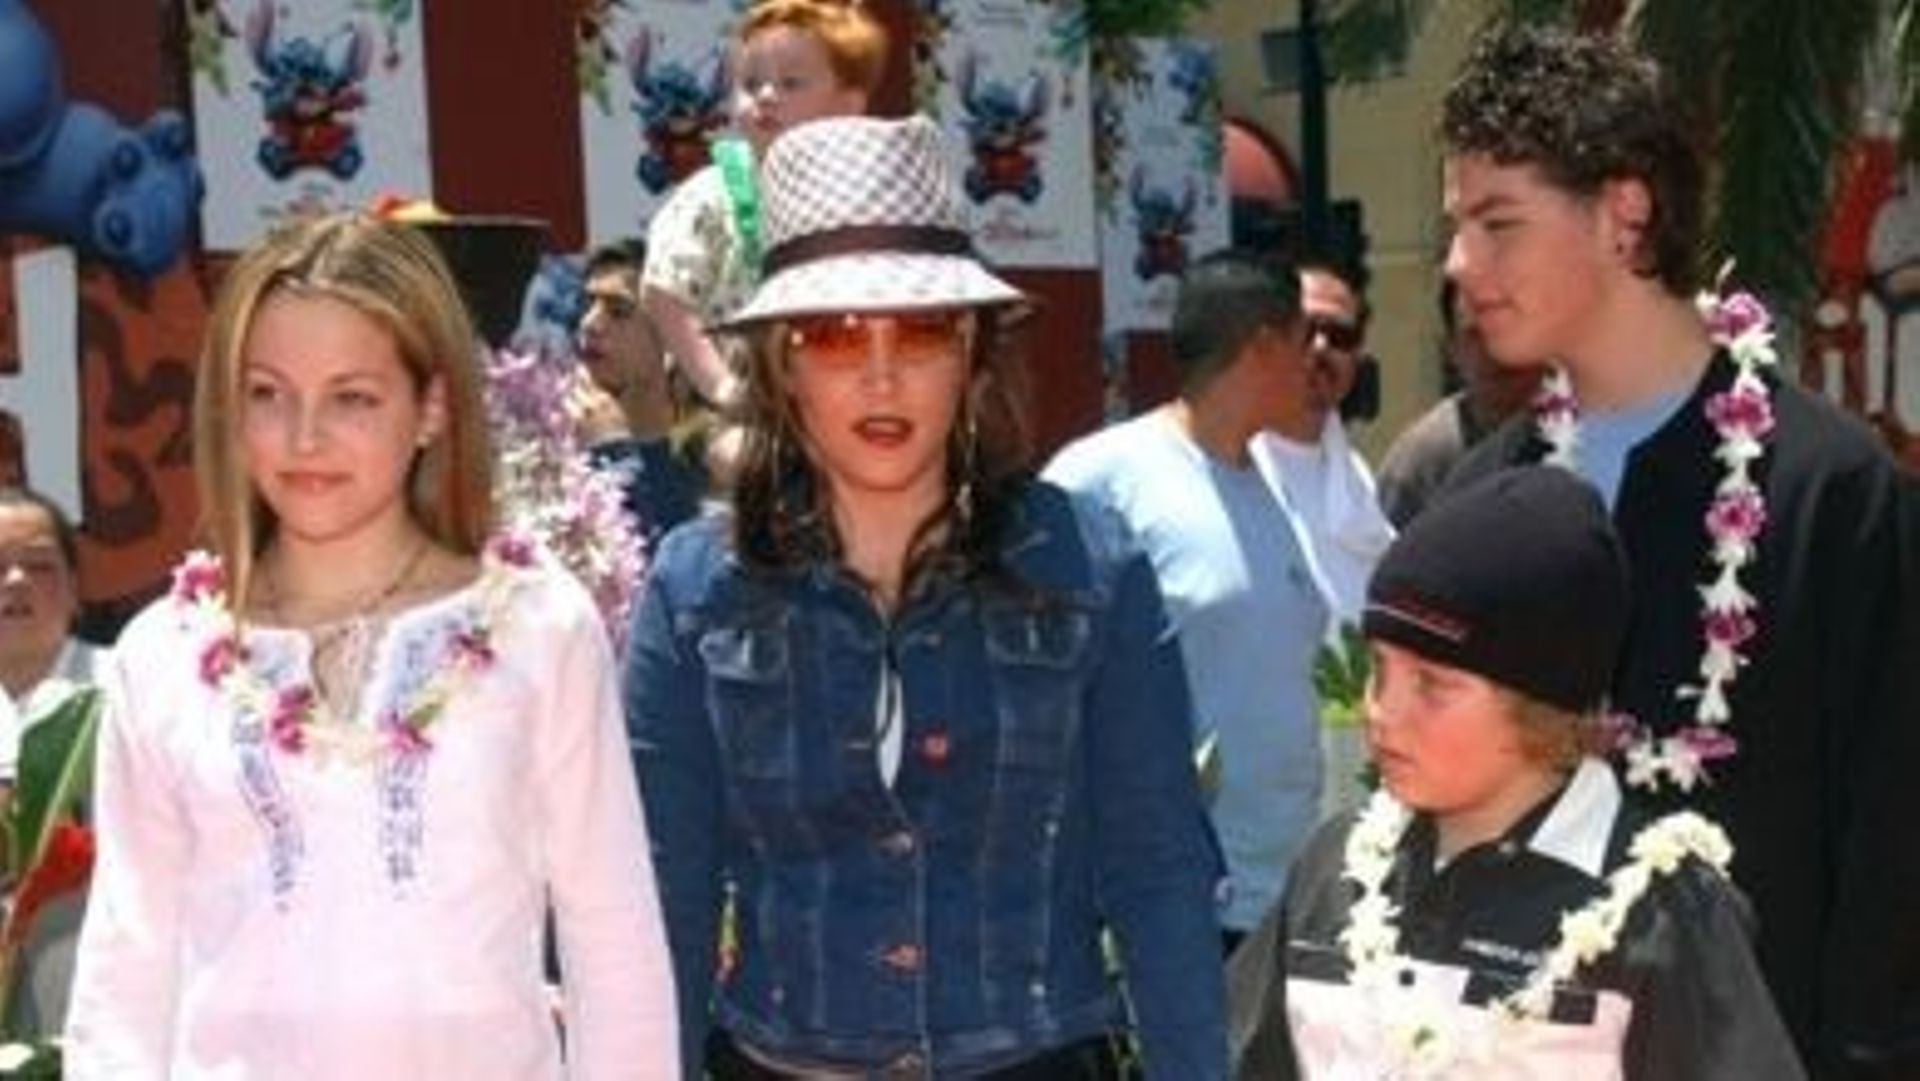 (FILES) In this file photo taken on July 16, 2002 Lisa Marie Presley and her children Benjamin Keough (R),  Riley Keough (L), and her half-brother Navarone Garibaldi (back) attend the premiere of "Lilo and Stitch" at the El Capitan theatre in Hollywood. L